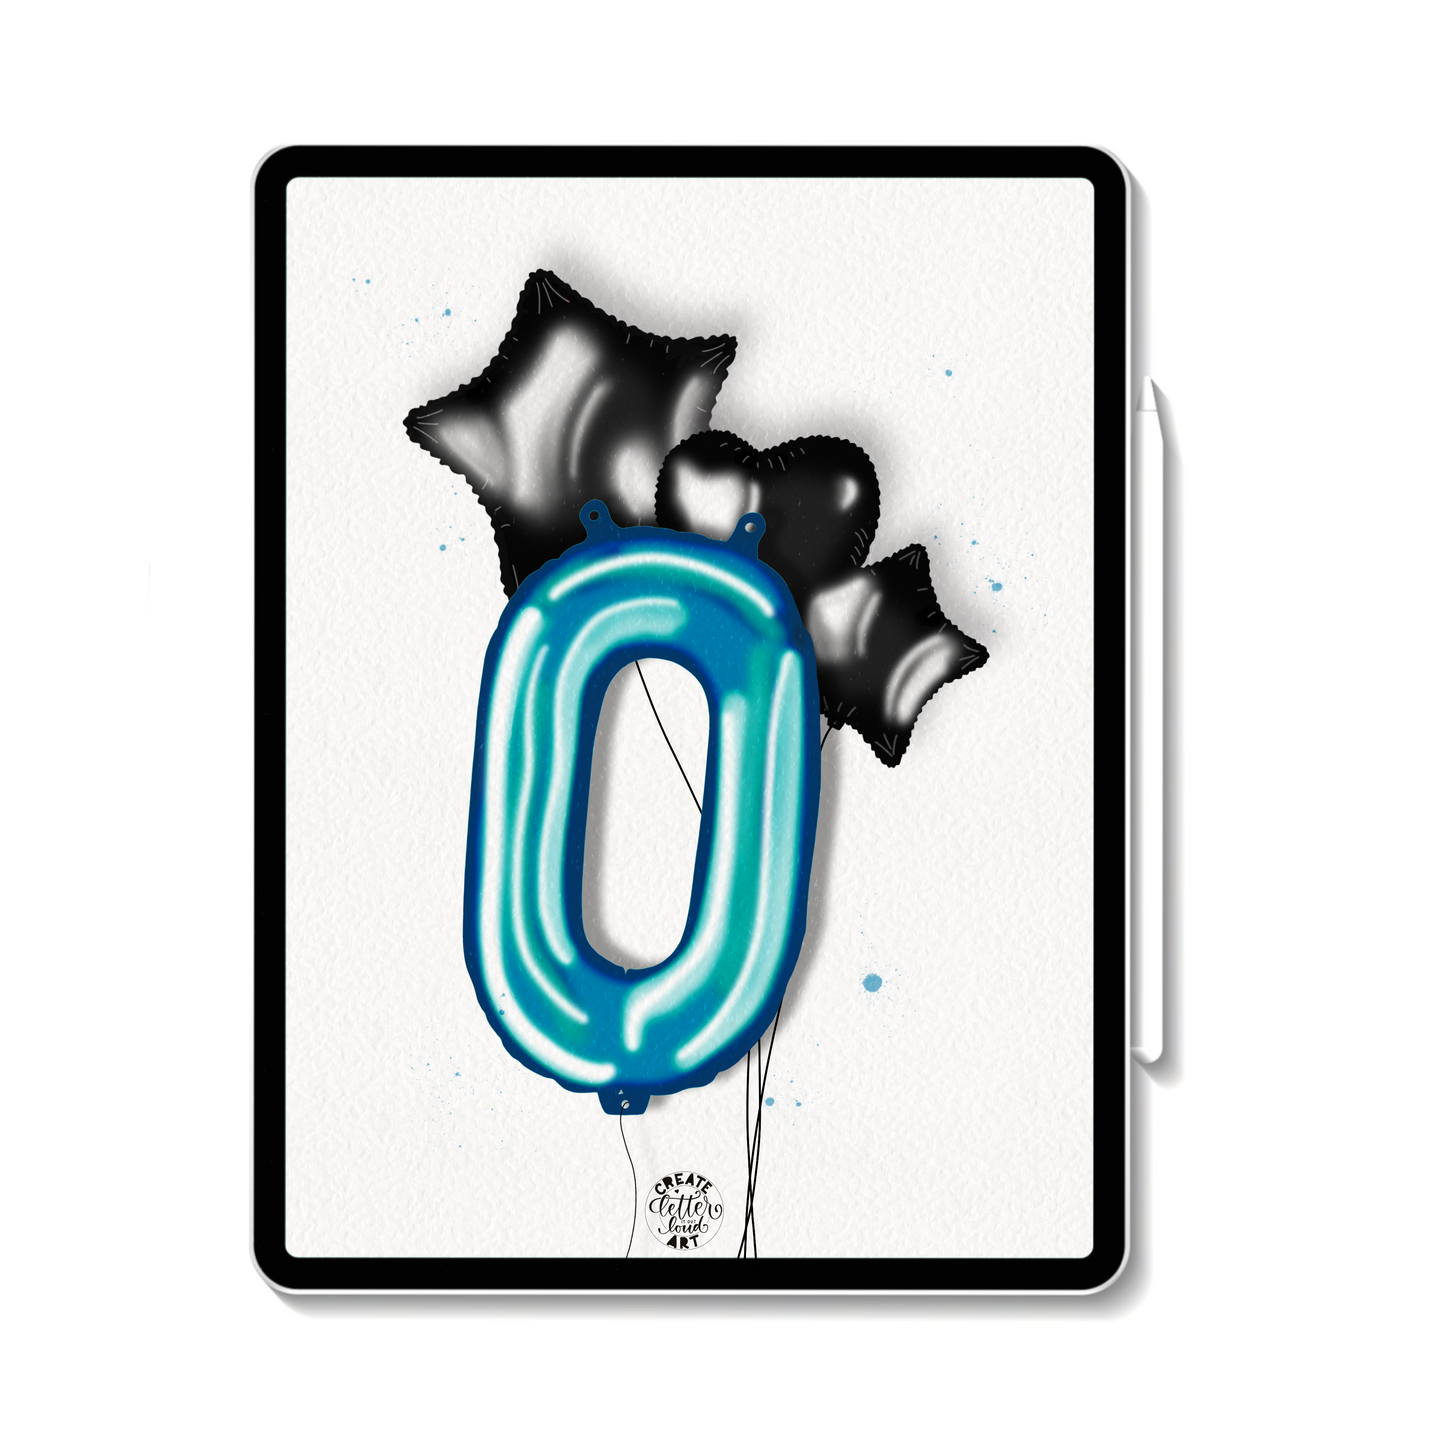 Procreate Ballons „Letters“, Download